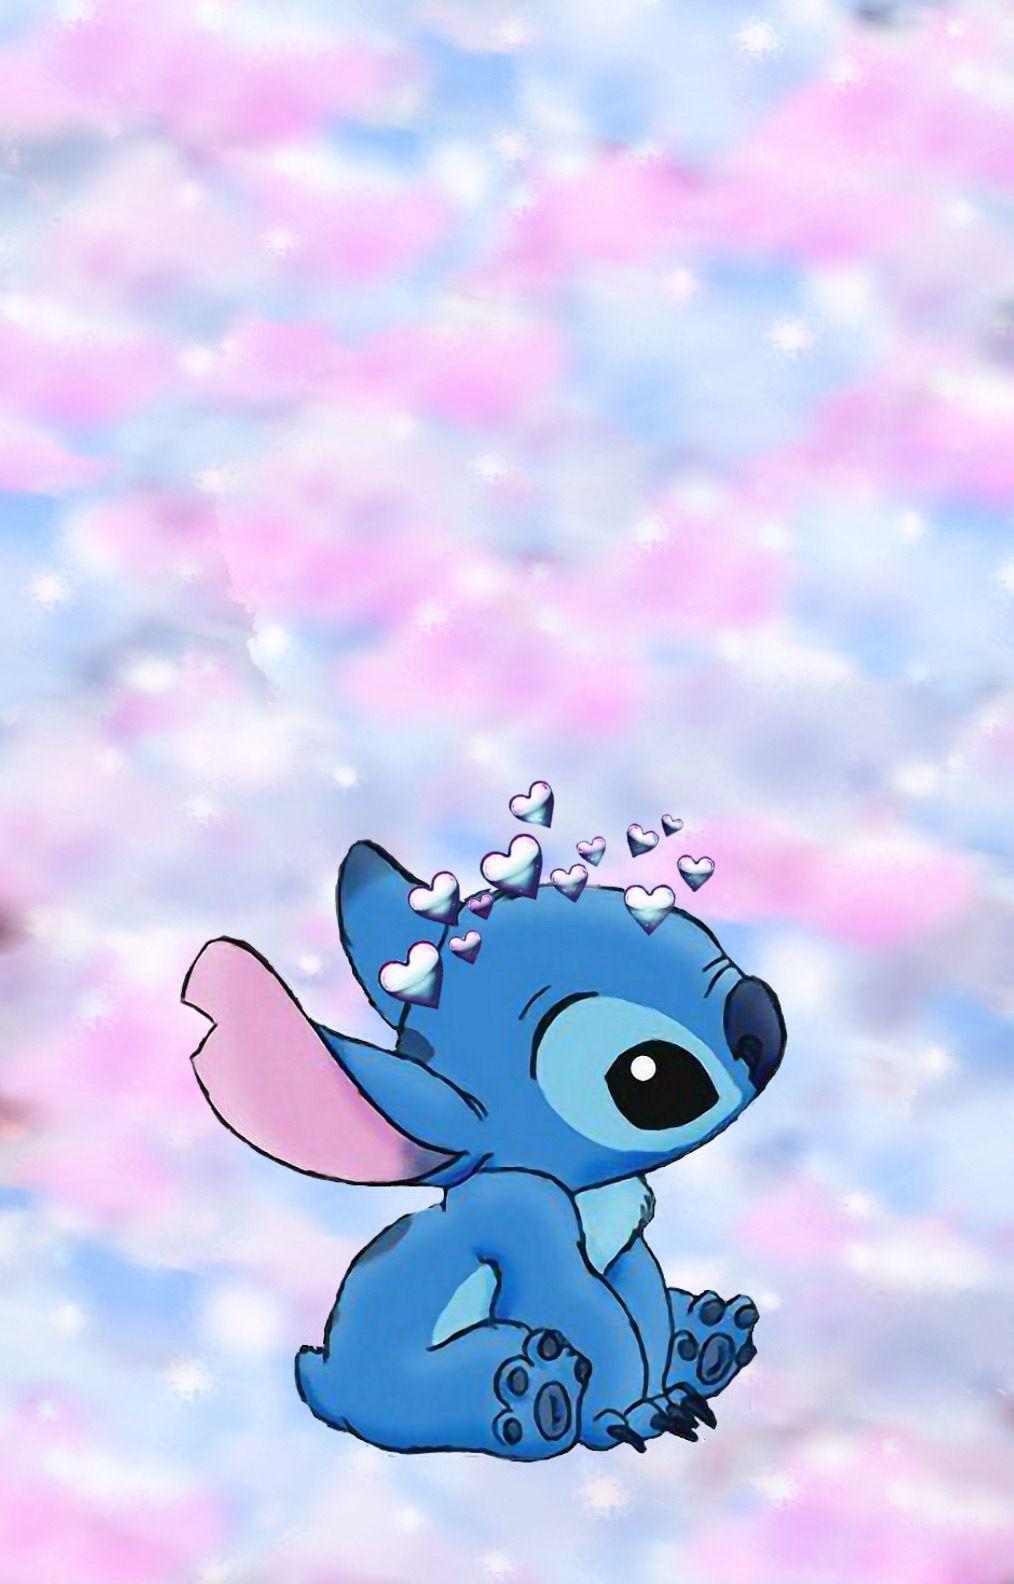 Cute Aesthetic Stitch Wallpapers Top Nh Ng H Nh Nh P